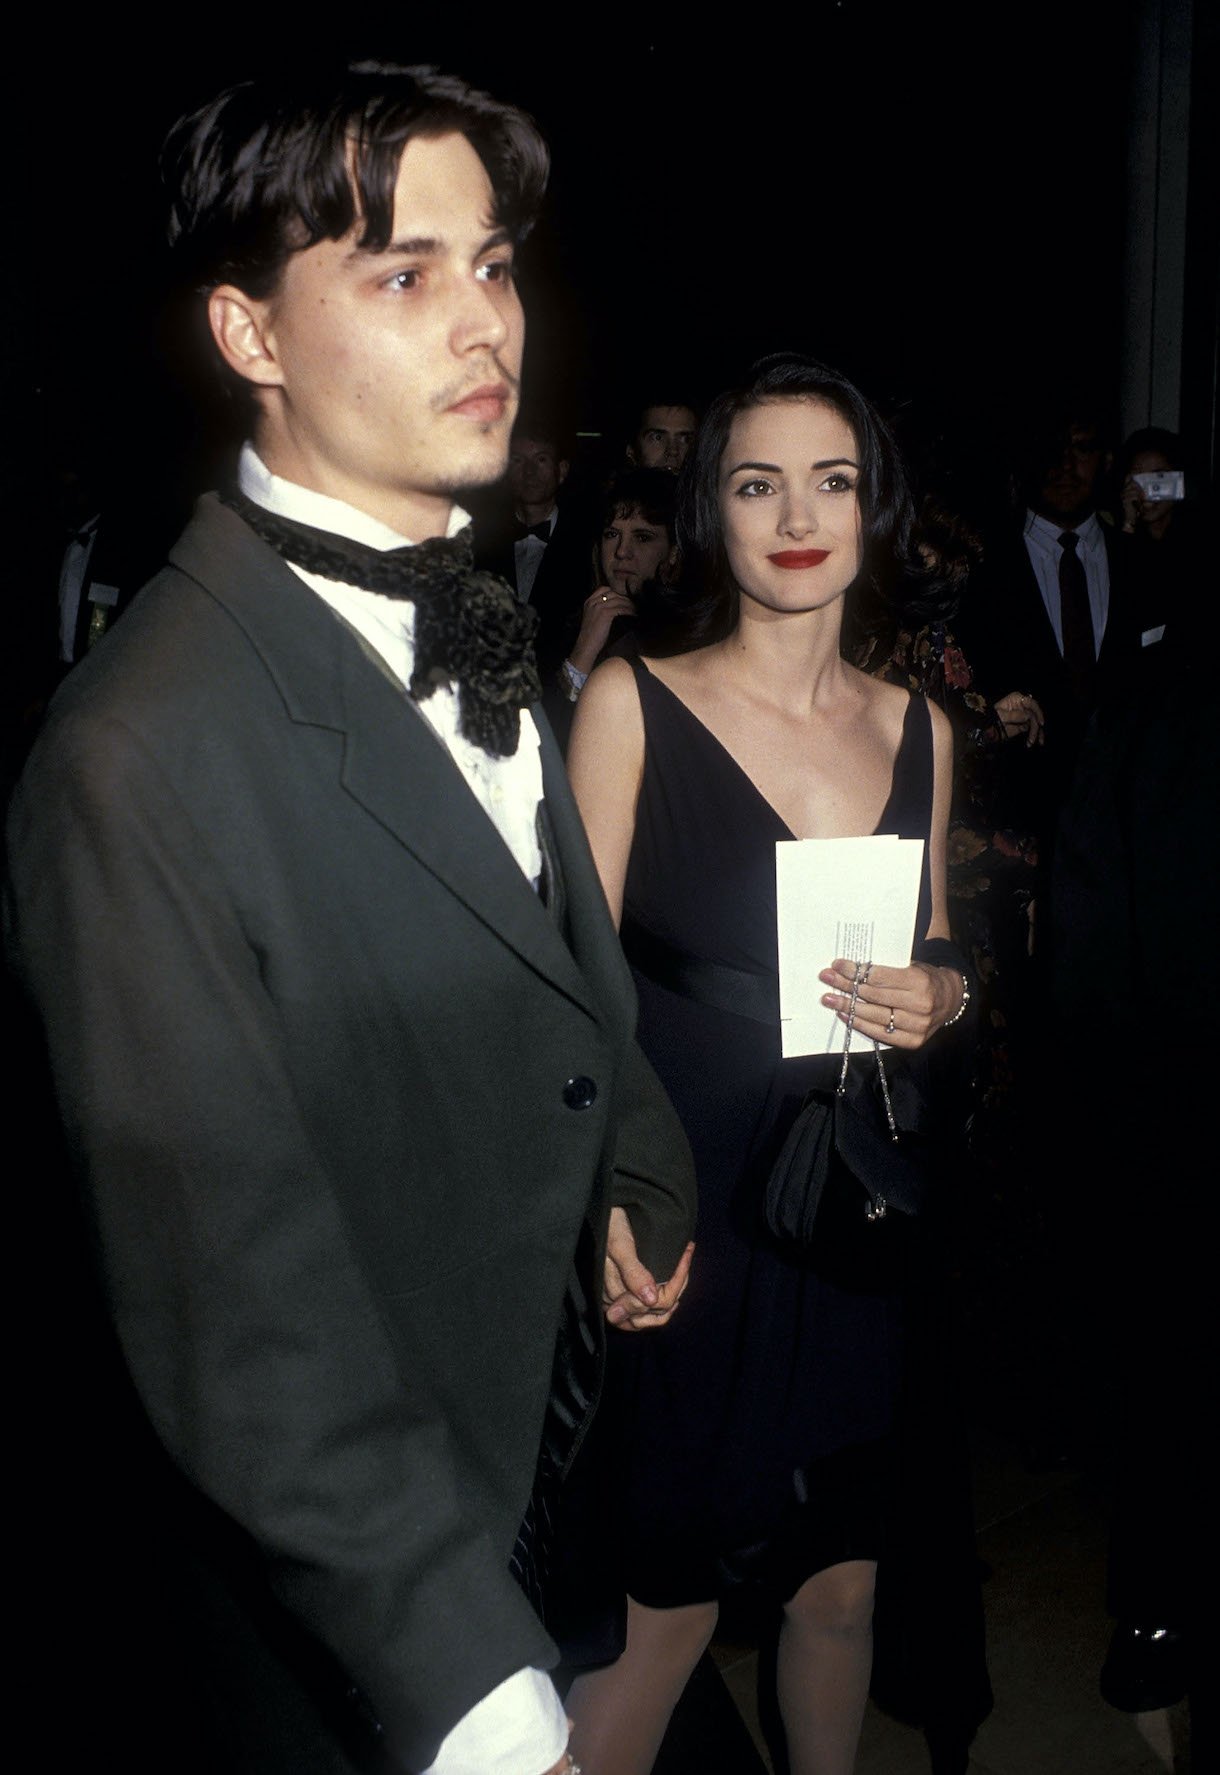 Johnny Depp and actress Winona Ryder in 1991